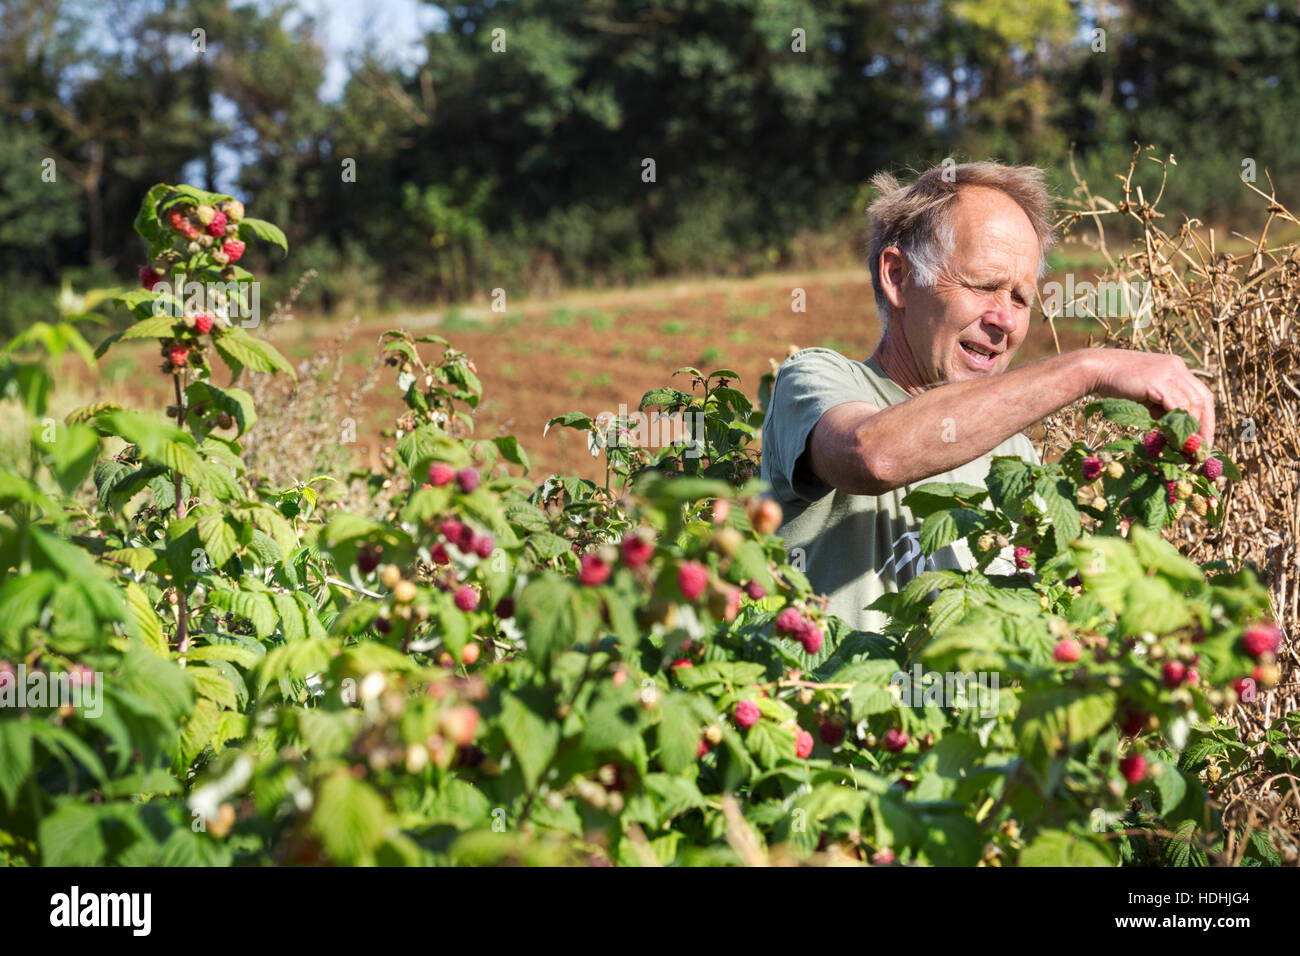 A man picking soft fruit, autumn raspberries from the canes in  full sunlight. Stock Photo